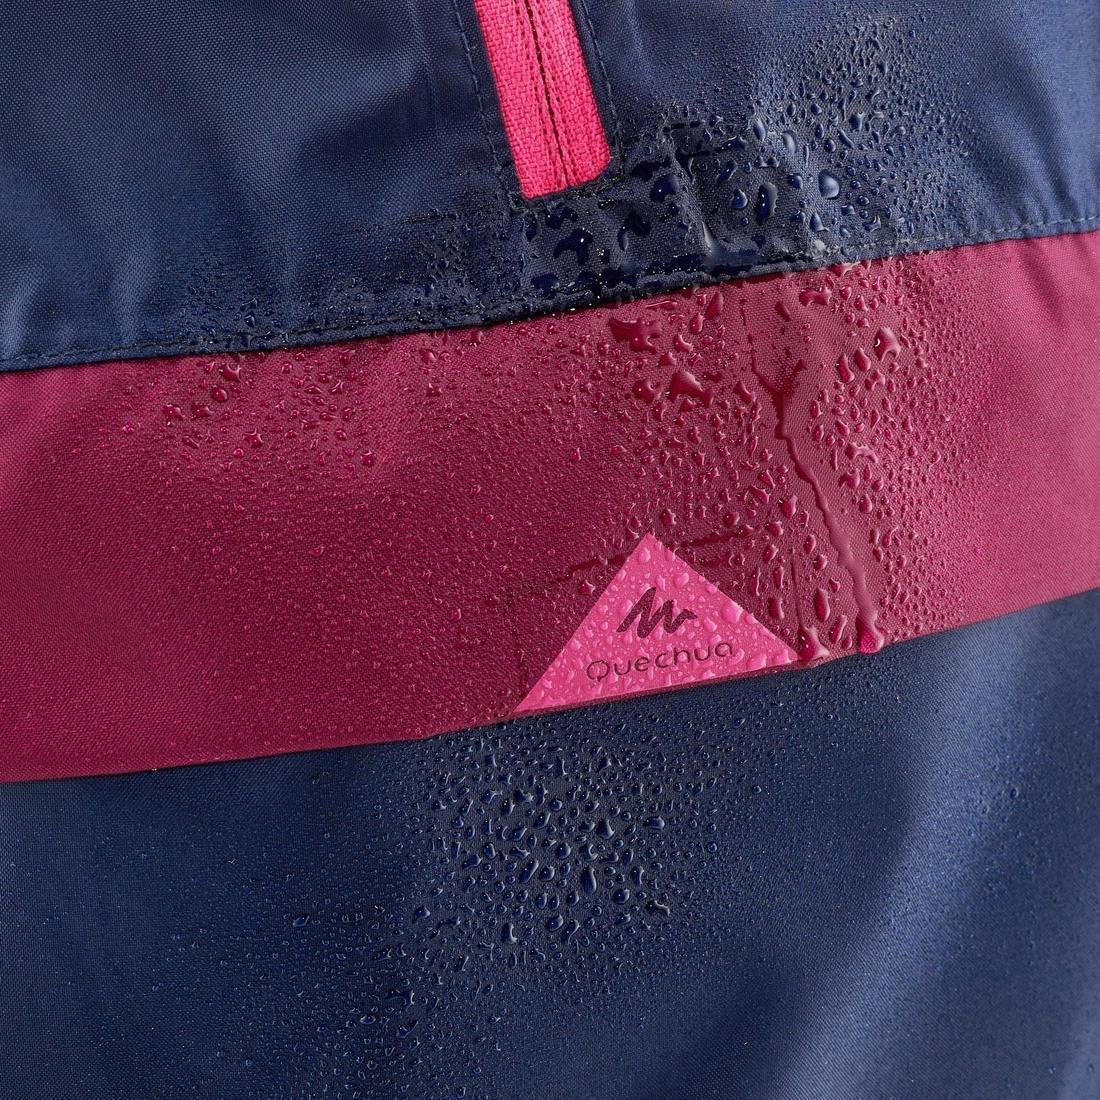 QUECHUA - Kids Waterproof Hiking Jacket - Mh100 Navy Blue And Pink